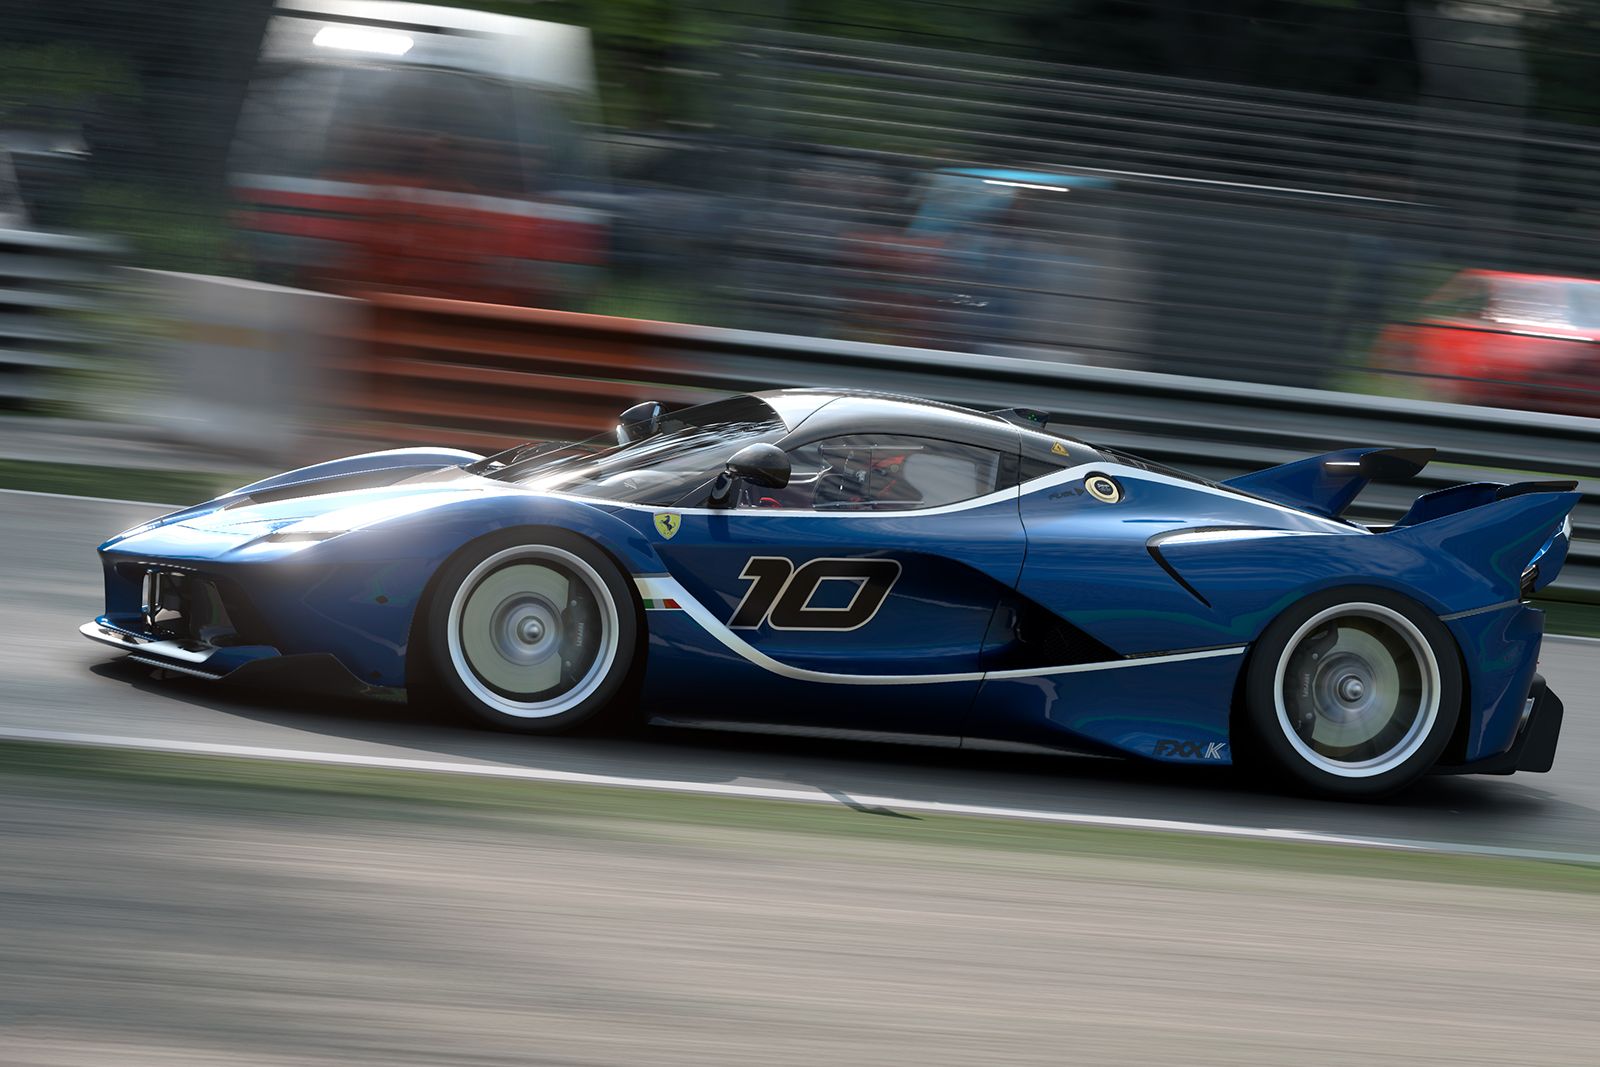 Gran Turismo 7 tips and tricks: Get started with this detailed racing game photo 5